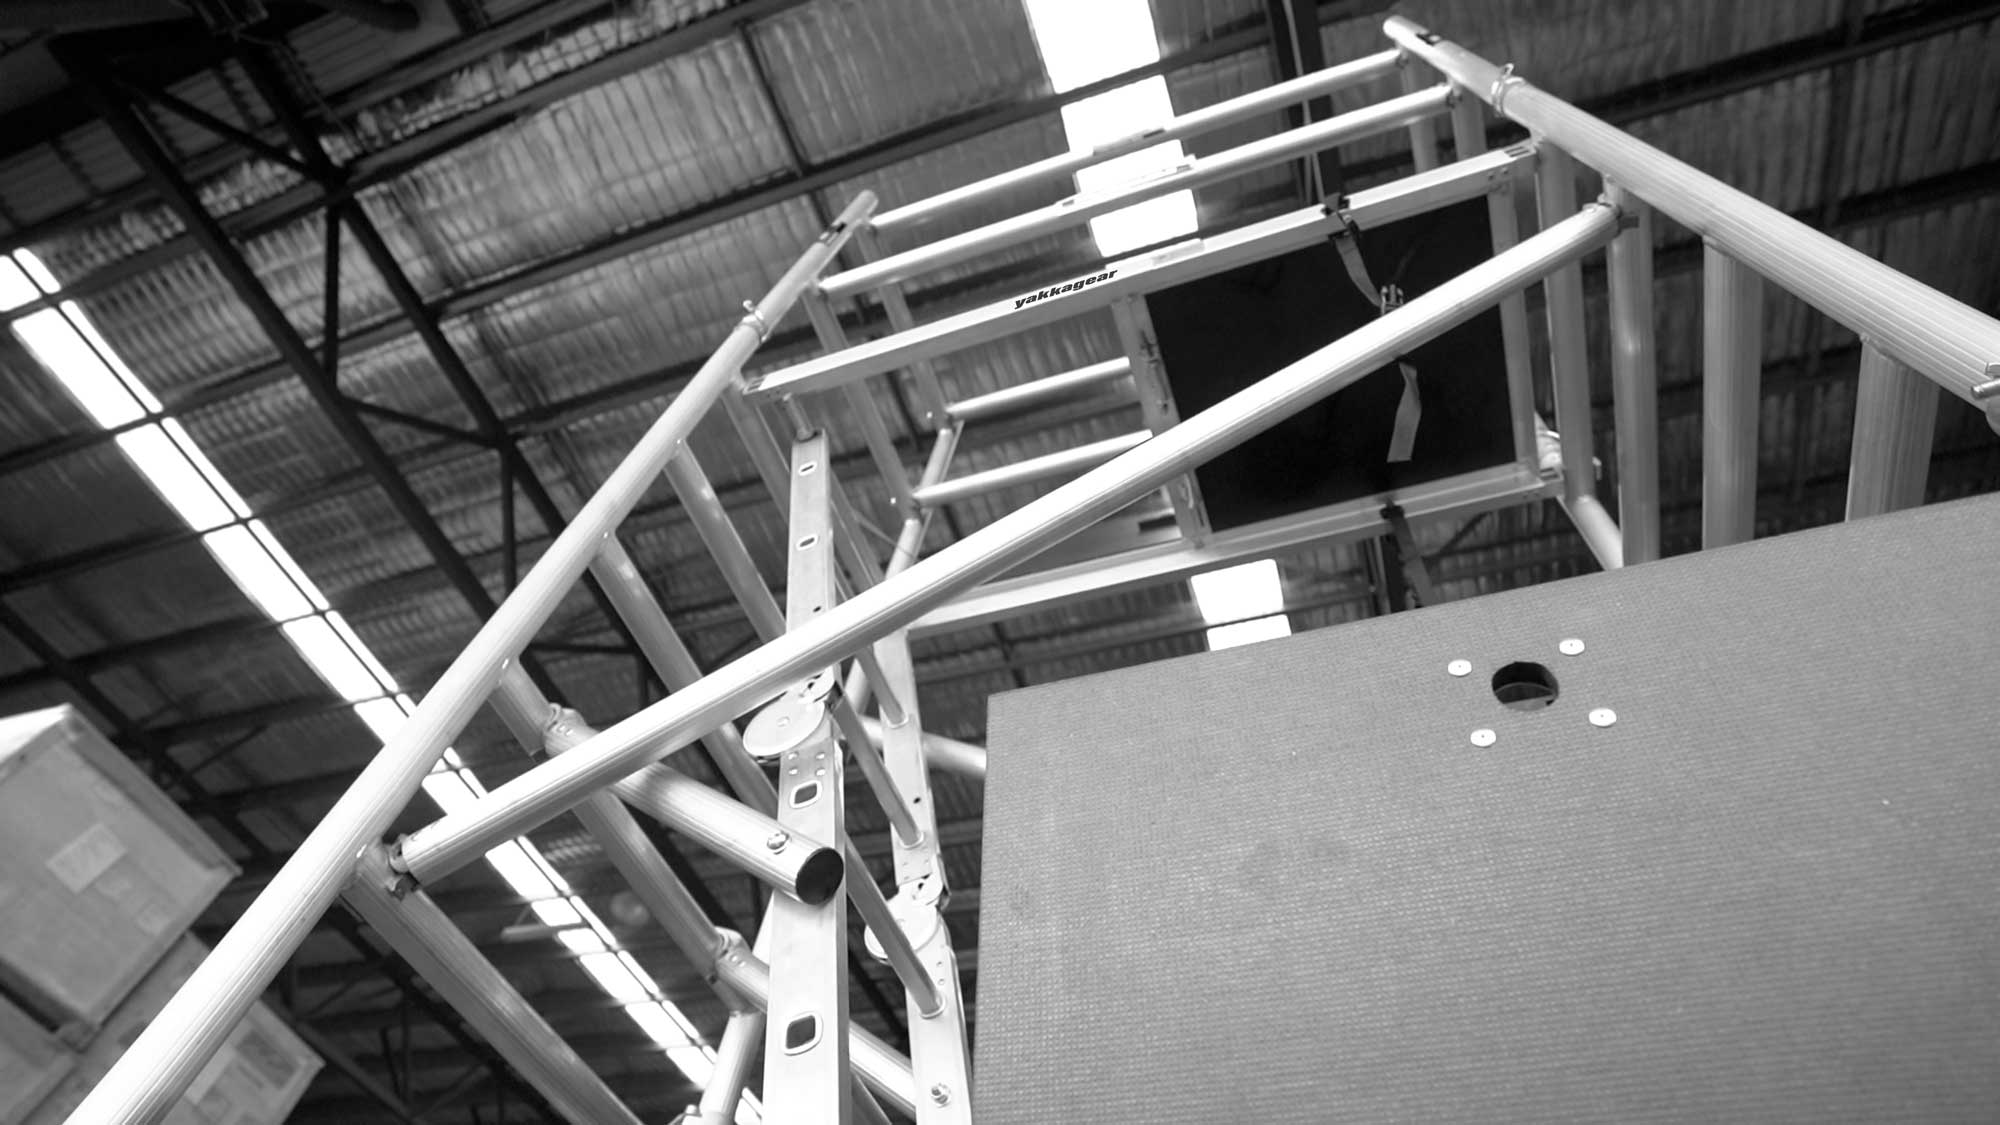 Yakka Gear Australia compact scaffolding tower as access equipment, including the Base Unit, Extension Unit, Tower Unit, and Adjustable Wheels. 1.44m Length x 0.74m Width, with working platform height of 3.9m and reach up to 6m high. View from ground level looking up towards the scaffolding set up in the warehouse. 